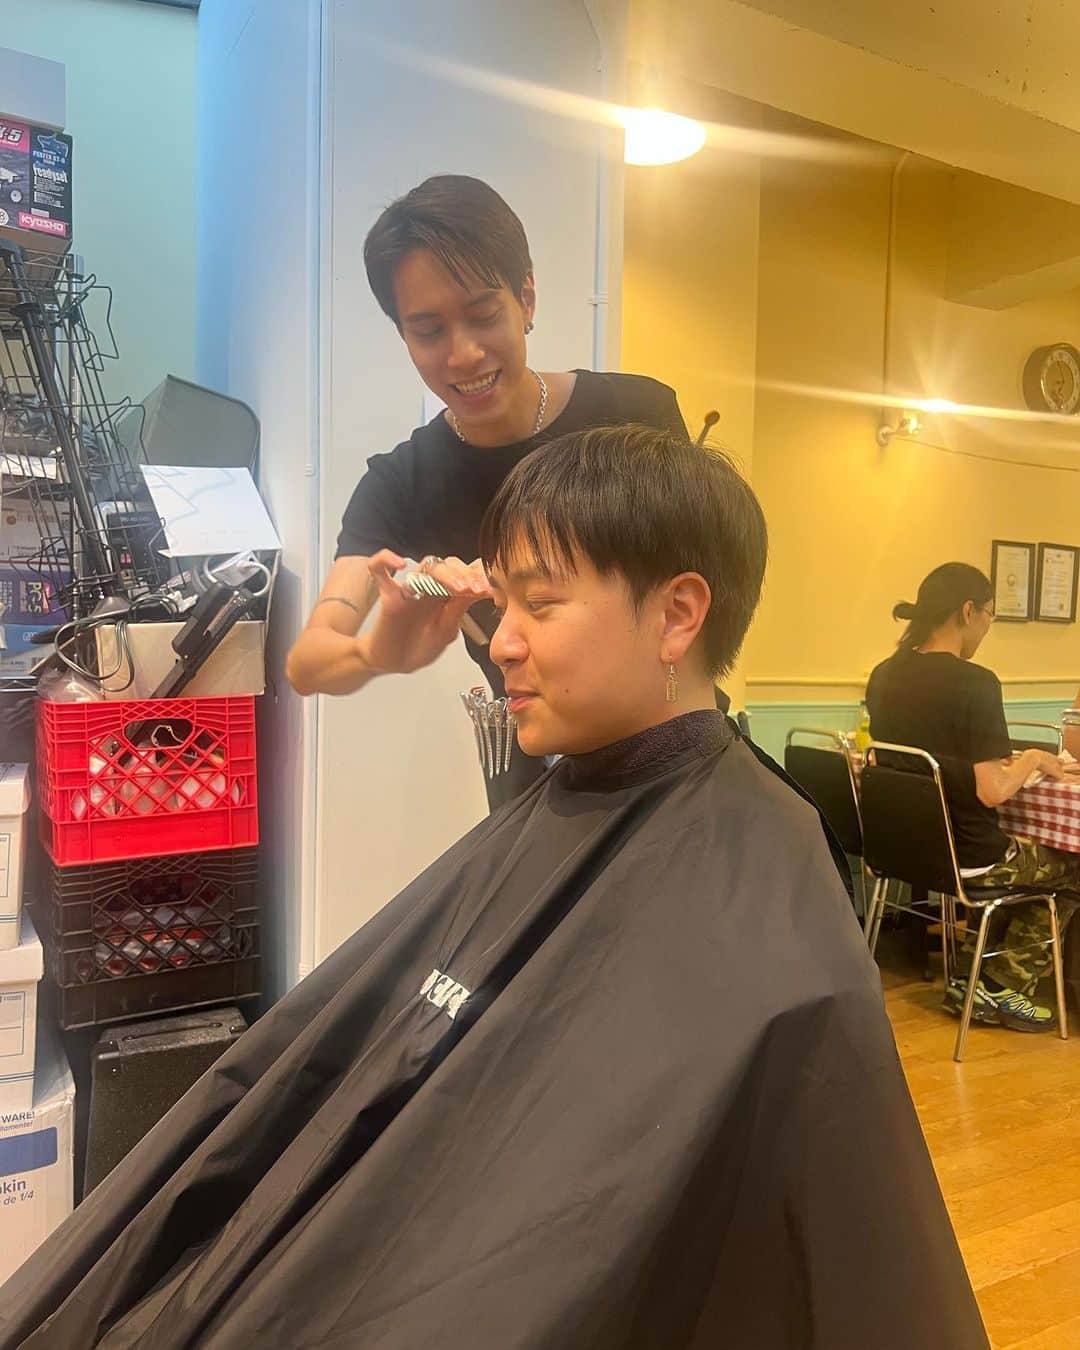 三浦さきえさんのインスタグラム写真 - (三浦さきえInstagram)「FLEURI hair cut popup in seoul🌼 me and @umeboooy @fleuri.jp  did popup for the first ever haircut in seoul.  It was only one day, but a lot of people came and it was a very happy and unforgettable time🥹🫶  @dragonhillprintshop @fuckyouiworkfortraitor @myokahara lent me a wonderful space, they kindly accepted me from the preliminary preparations, and they helped us a lot on the day.  When I announced the popup in Seoul, I was a little bit nervous, but I received a lot of reservations, and the customers were all really sweet.they makes me happy 🥹  Thank you so much for the wonderful time. I want to do it again soon🫶🫶🫶  ずっとやりたいと思っていたヘアカットポップアップ。言葉にできないくらい楽しくて、改めてこの仕事を選んでよかったなぁと。思えた時間でした🫧  なぜかあんまりイメージが上手くわかなくて形にしていなかったんだけど、今がタイミングかもっていきなり思い立って。本当にやってよかった。  お店をかしてくれたjaeもhyejin 本当に本当にナイスで 来てくれたお客様も全員素敵な方達で、どこにいっても素敵な人たちに巡り会えること。 本当に恵まれているなと改めて感じさせられたし、自分がする仕事をこんなに求めてくれて喜んでくれる人が世界中にいることを感じて、原点回帰ができました。  私はFLEURIをつくったけど、 今ではFLEURIとゆう存在がみんなからの愛をもらって、私を支えてくれていると感じさせられた時間でした。  またここから頑張って、みんなにもらった愛をちゃんと返していけるようにします🥺🫶 大好きです💖💖💖 本当にありがとうございました！  @umeboooy いつも一緒にFLEURIを支えてくれて、戦ってくれてありがとう💖  世界中でpopupしたいっ🫧🫧  한국에서 많은 멋진 사람들을 만나서 헤어컷을 기뻐해주셔서 행복했습니다. 고마워요. 사랑 해요. 또 곧 만날 수 있는 것을 즐겁게 하고 있습니다💗💗💗💗💗」8月26日 22時52分 - sakiemiura